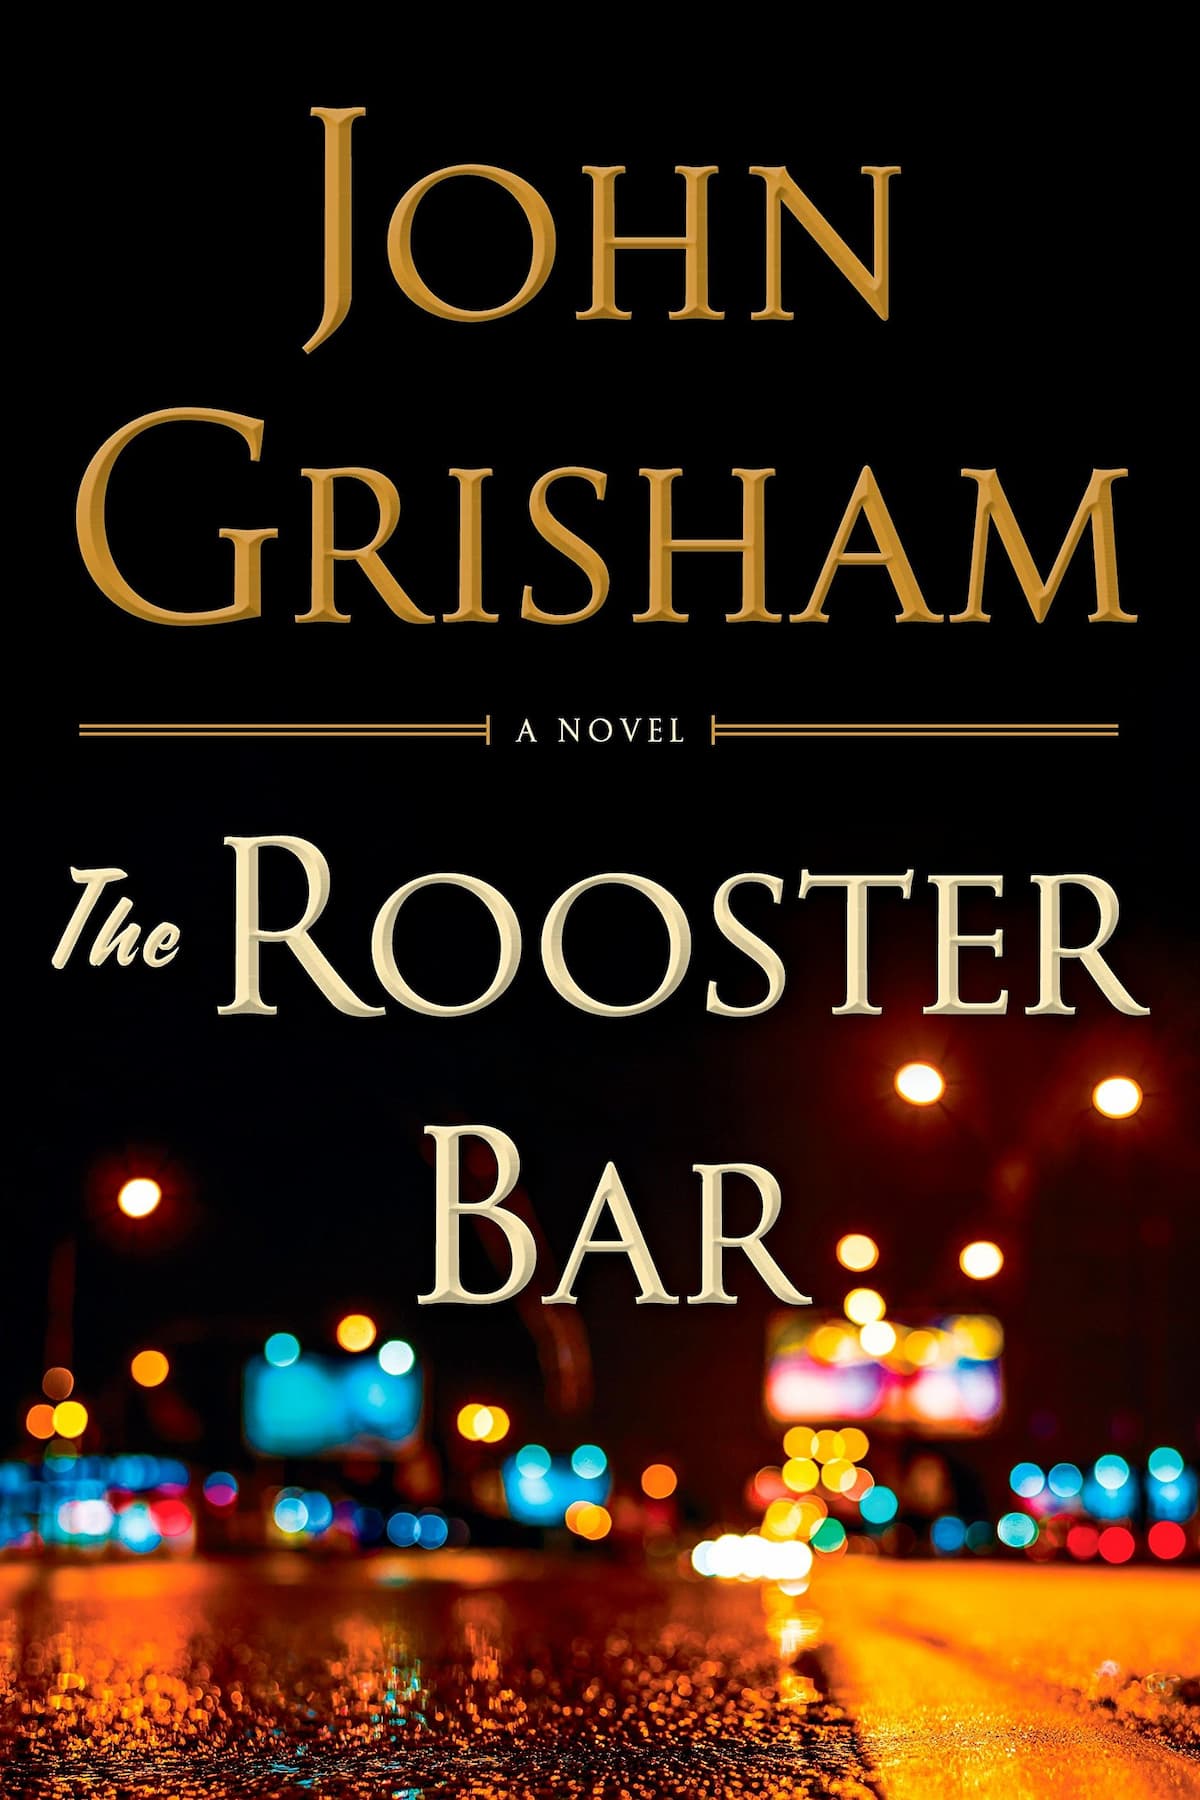 Crime Fiction and Mysteries, Fiction, John Grisham Books In Order, Legal Thrillers, Thrillers, The Rooster Bar – John Grisham